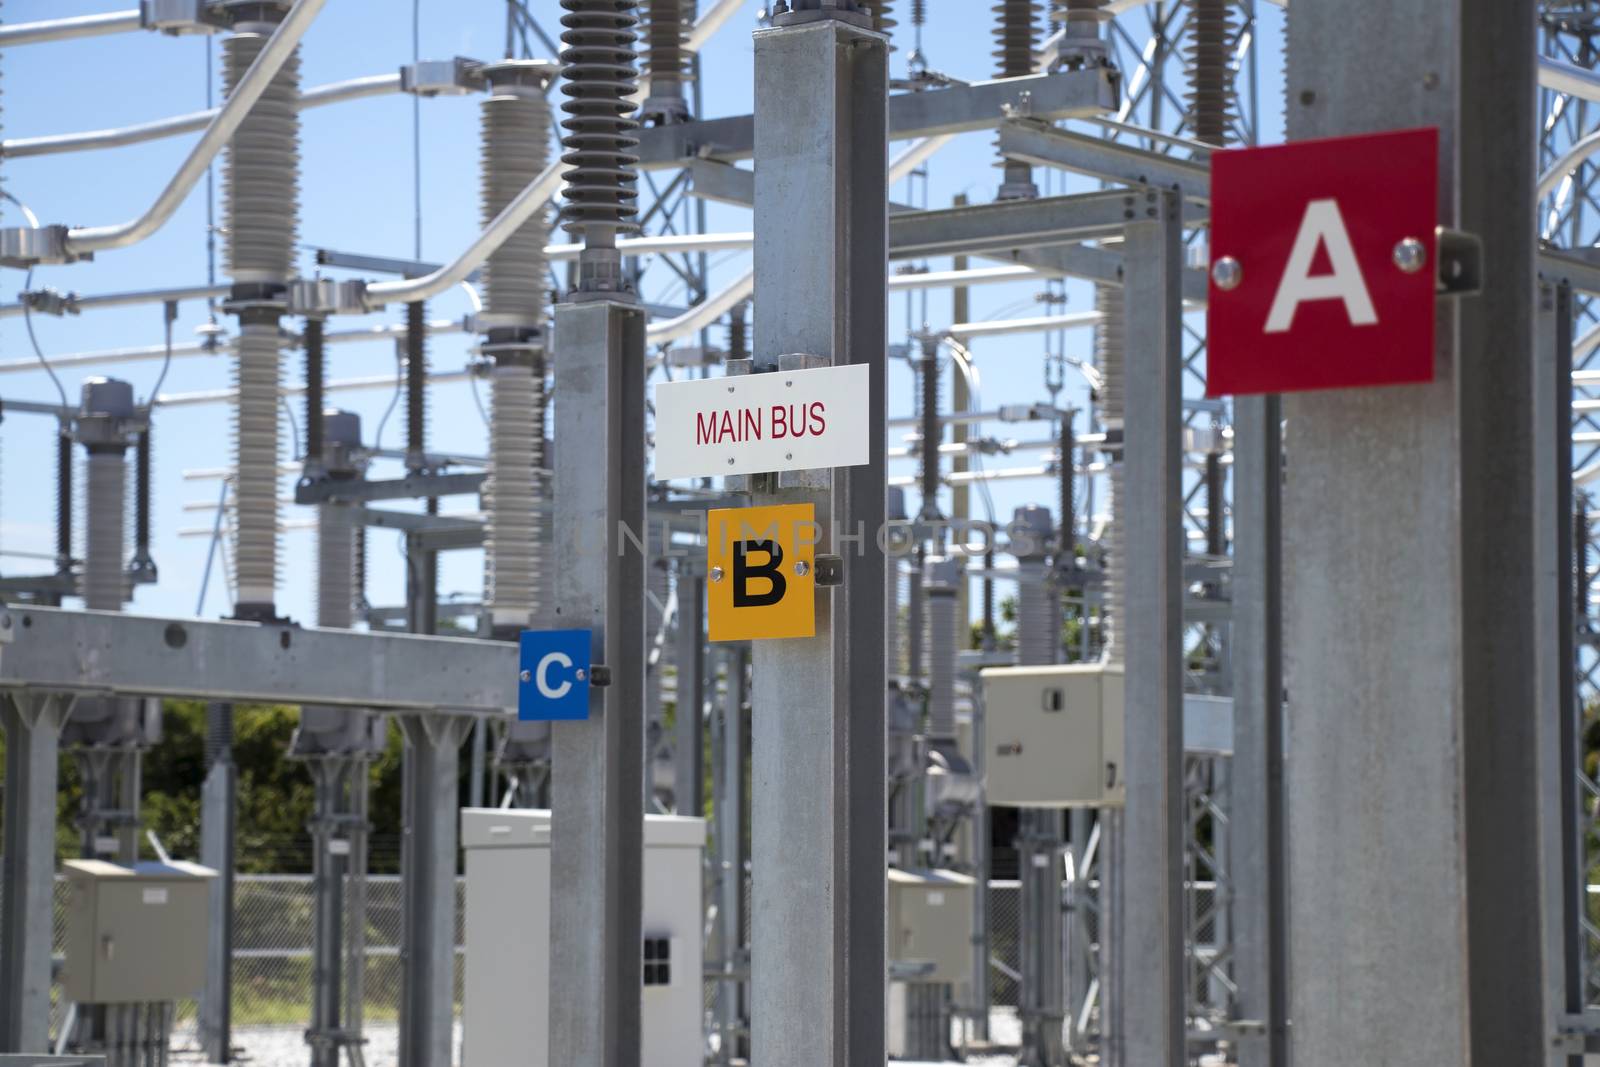 Sign showing main bus of a three-phase electrical system in the power substation.